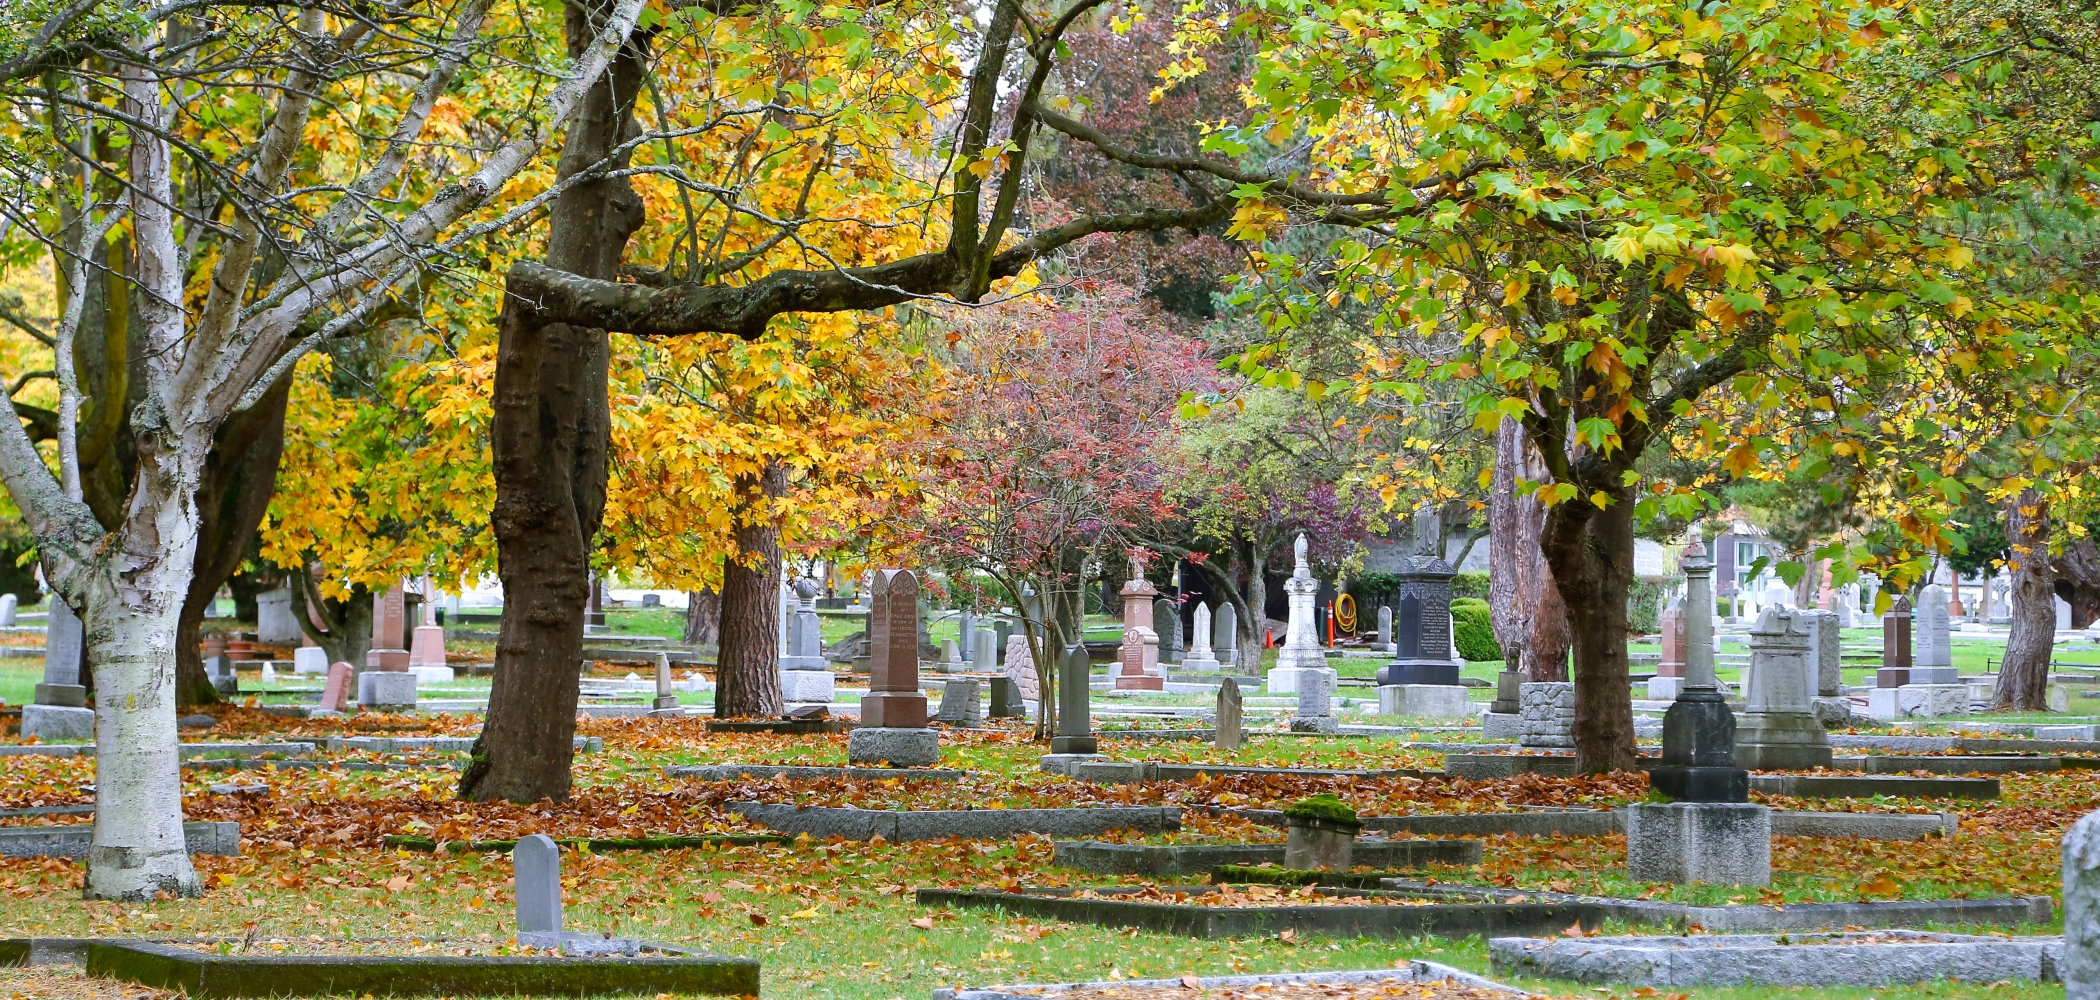 8 Ways to Embrace Halloween in Victoria